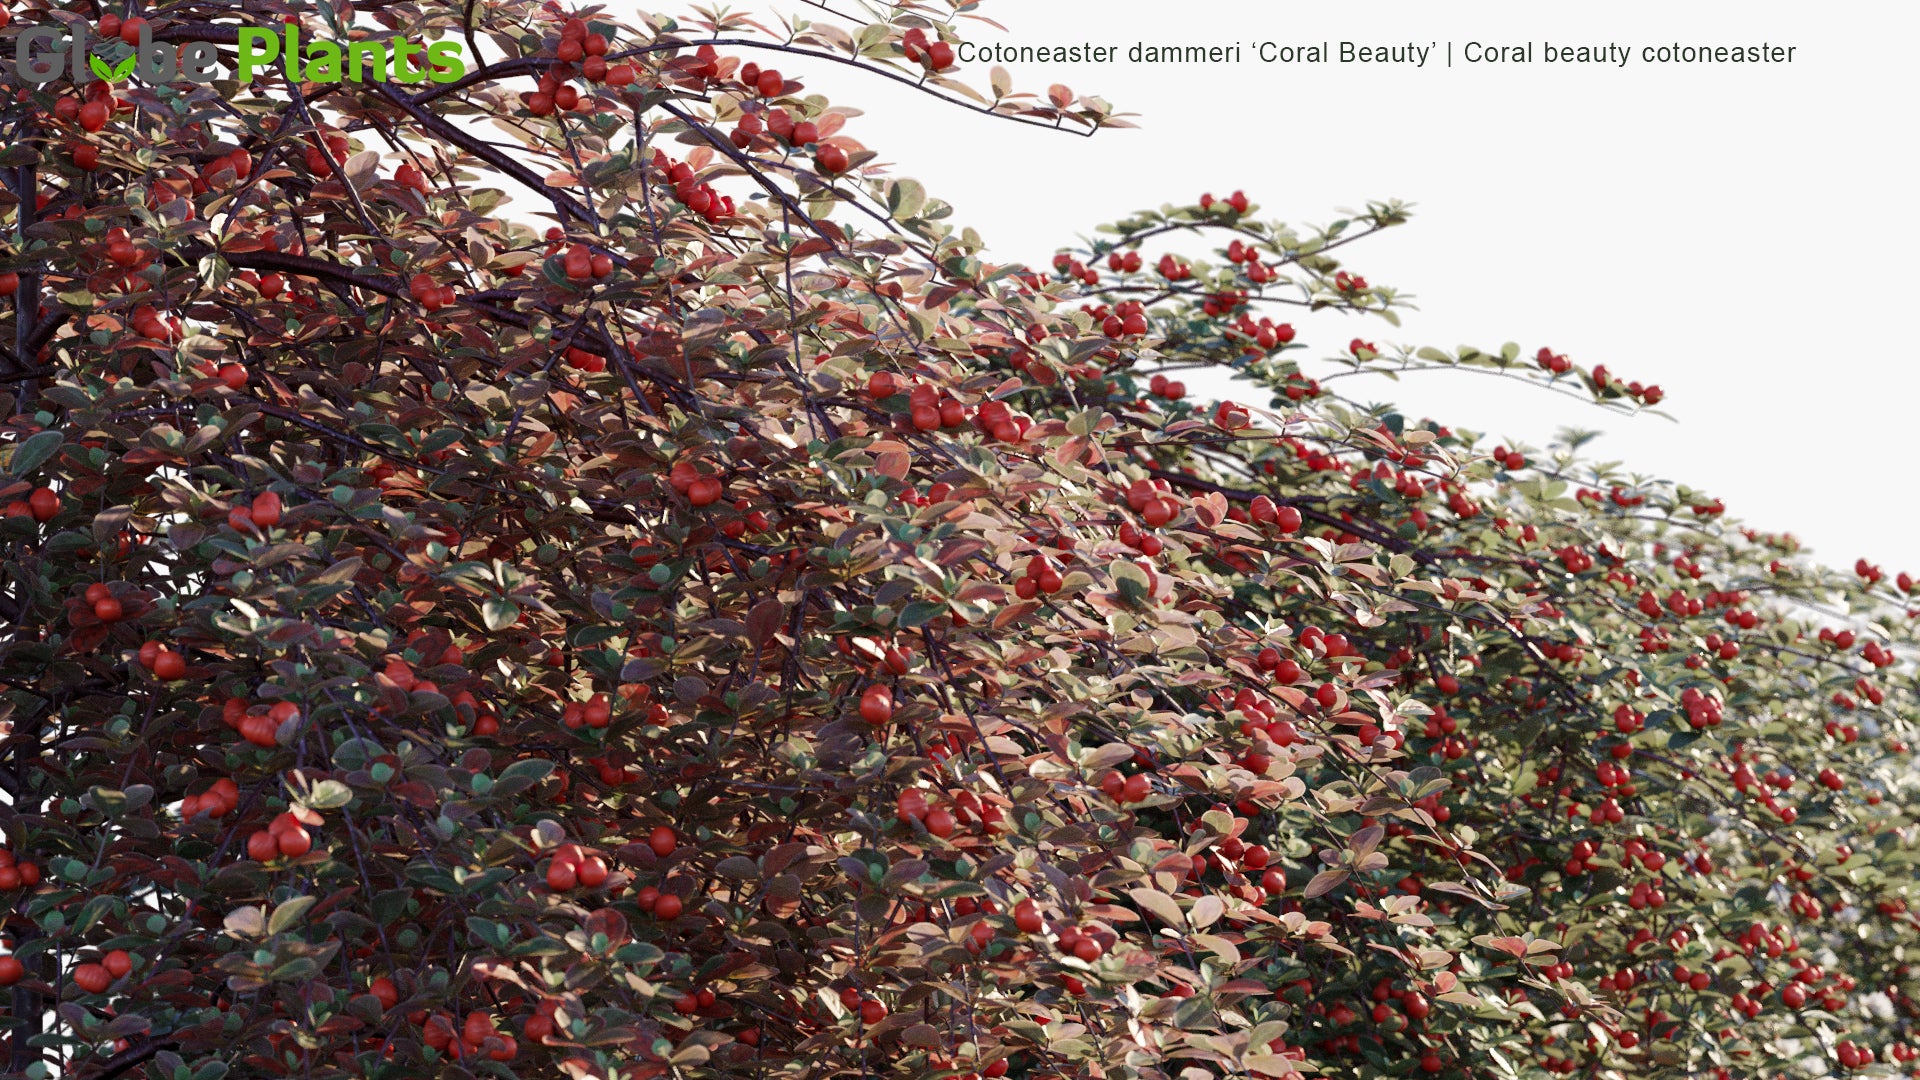 Cotoneaster Dammeri 'Coral Beauty' - Coral Beauty Cotoneaster